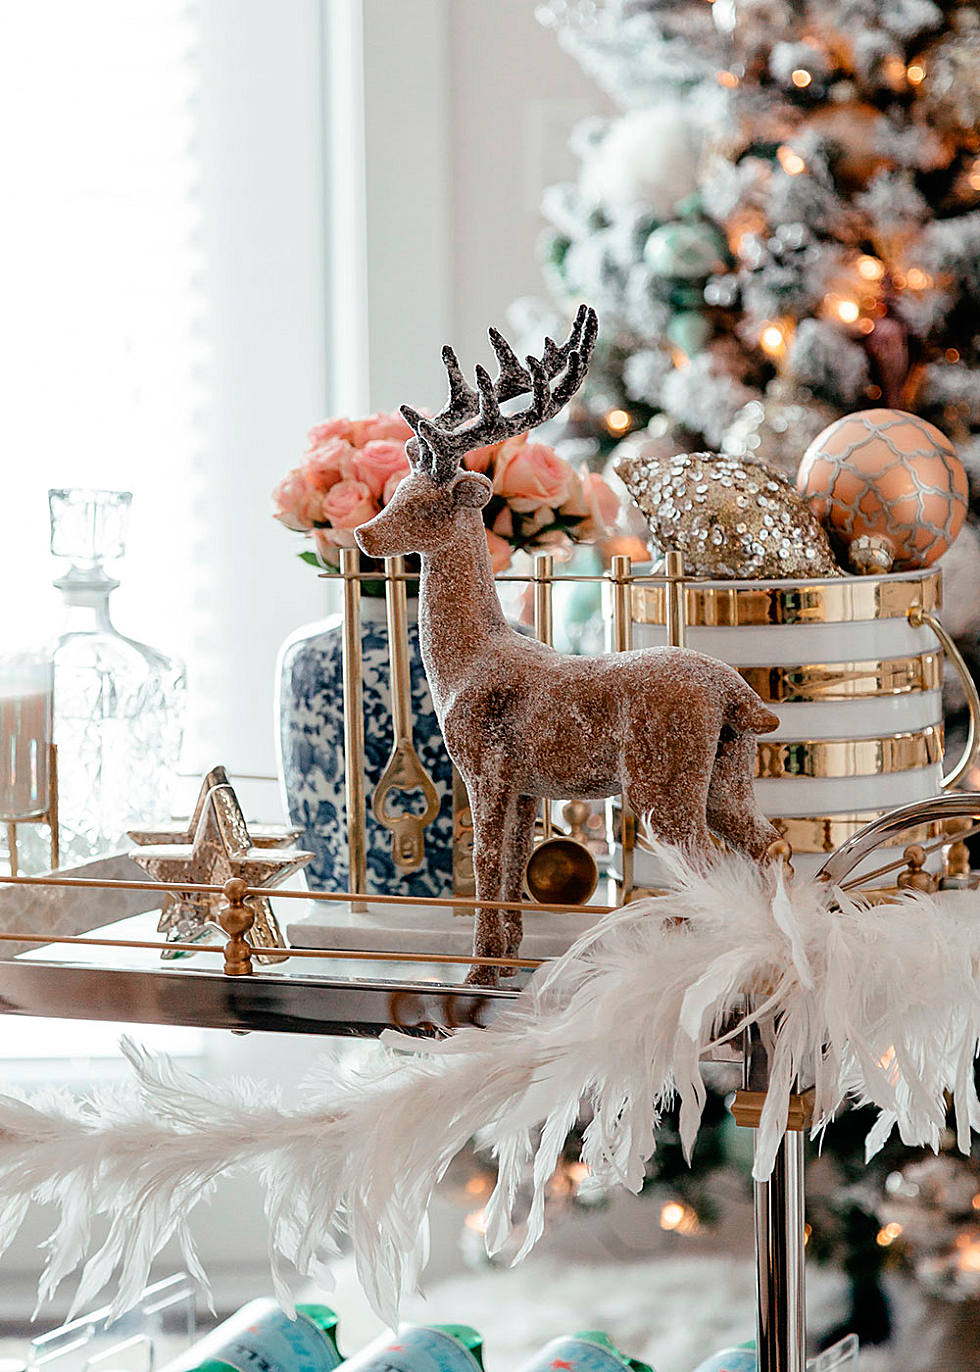 How to decorate with ornaments